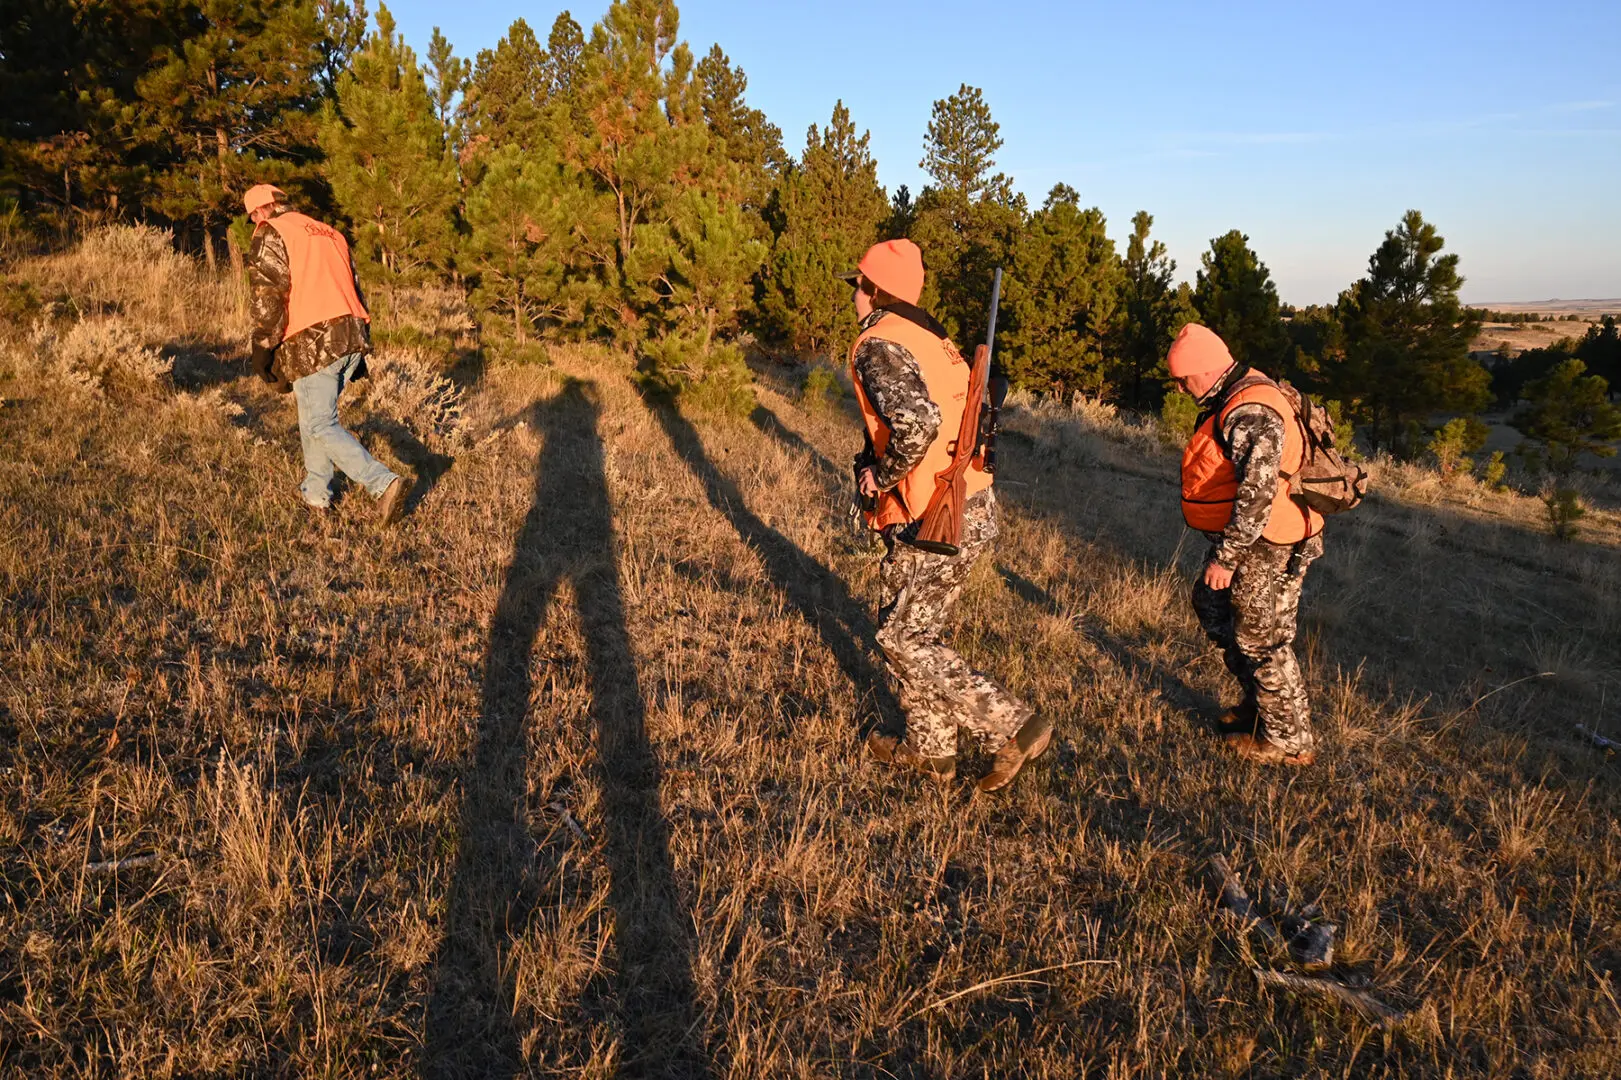 A group of hunters in camouflage gear walking through the grass.